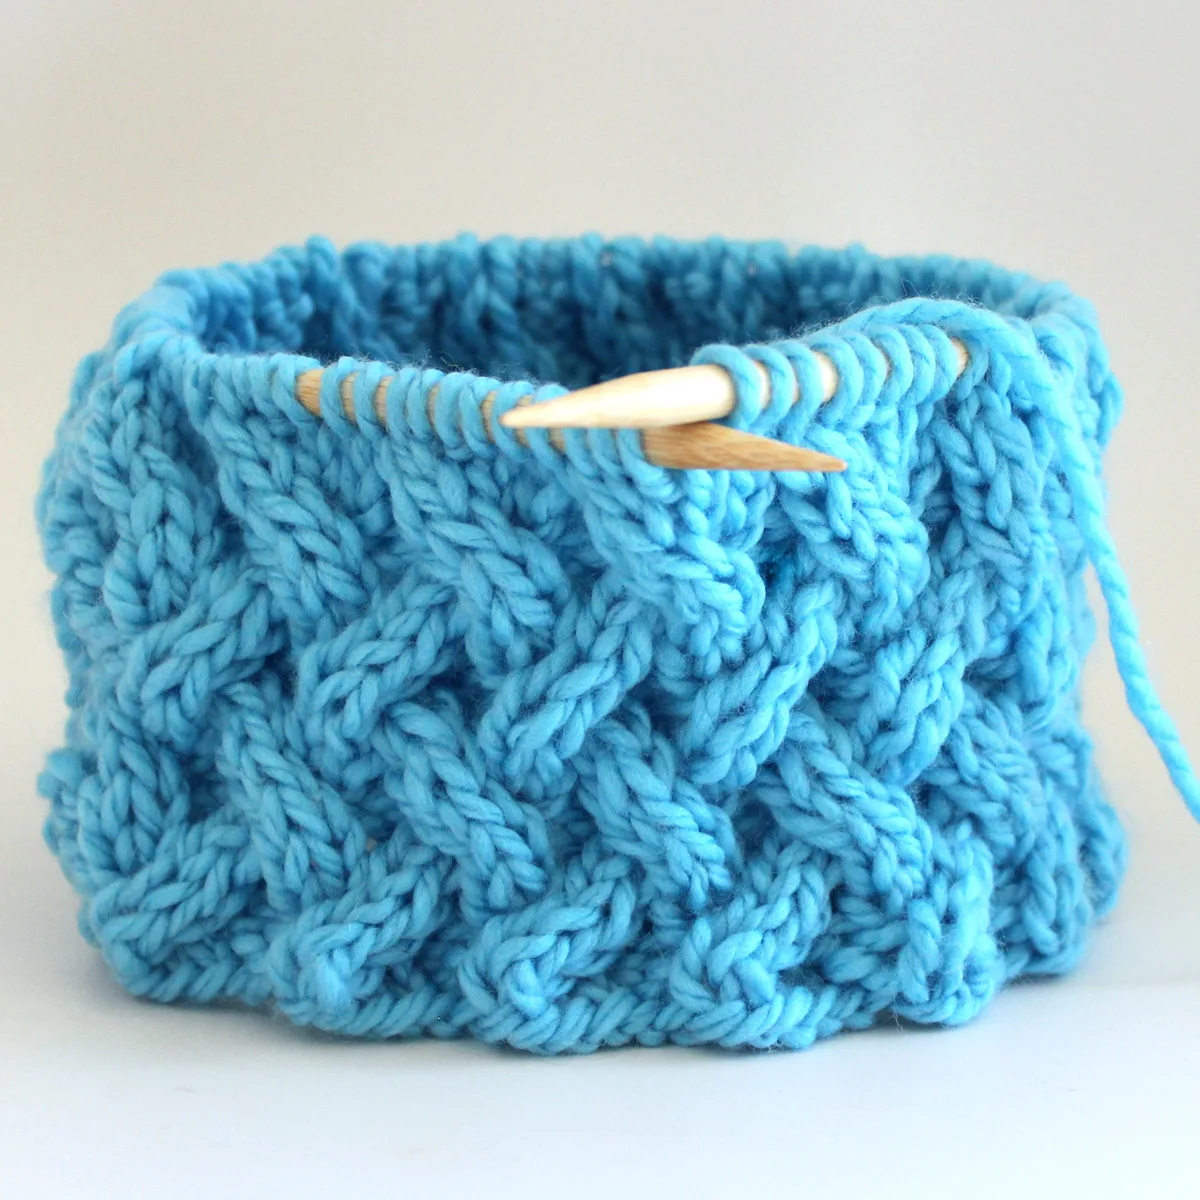 Lattice Cable Stitch on circular needles knitted in the round with blue color yarn.